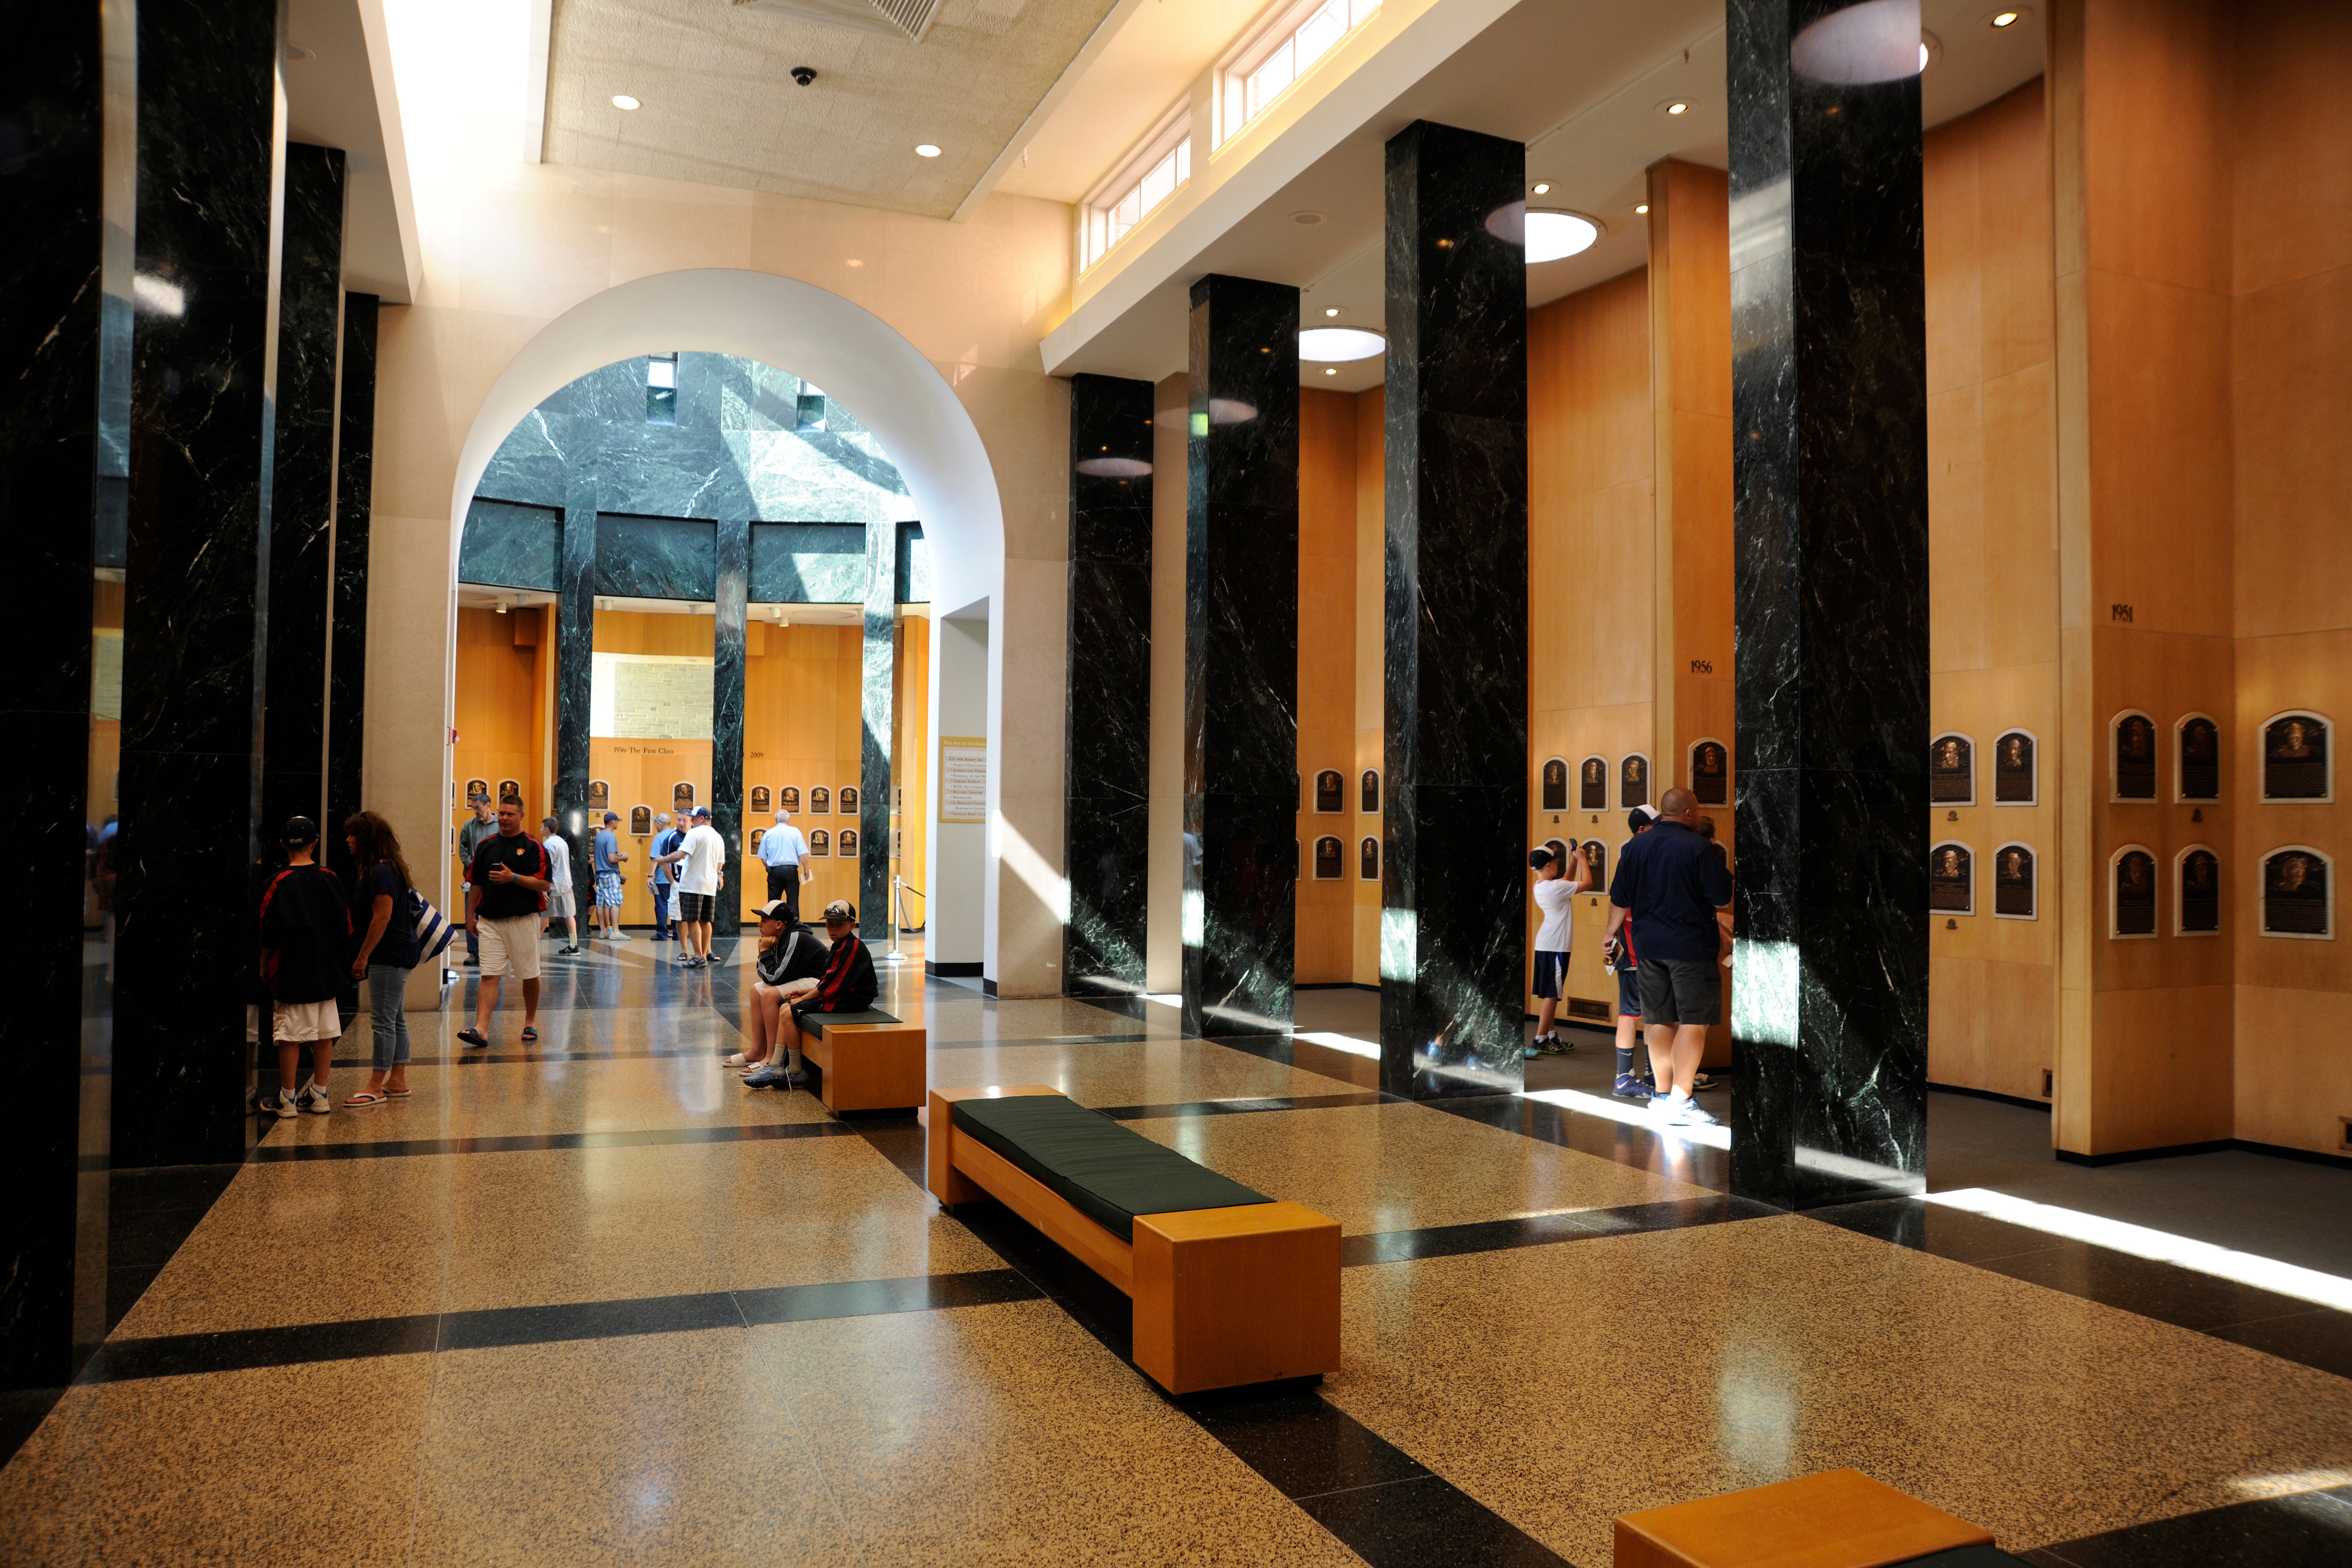 HALL OF FAME PLAQUE GALLERY